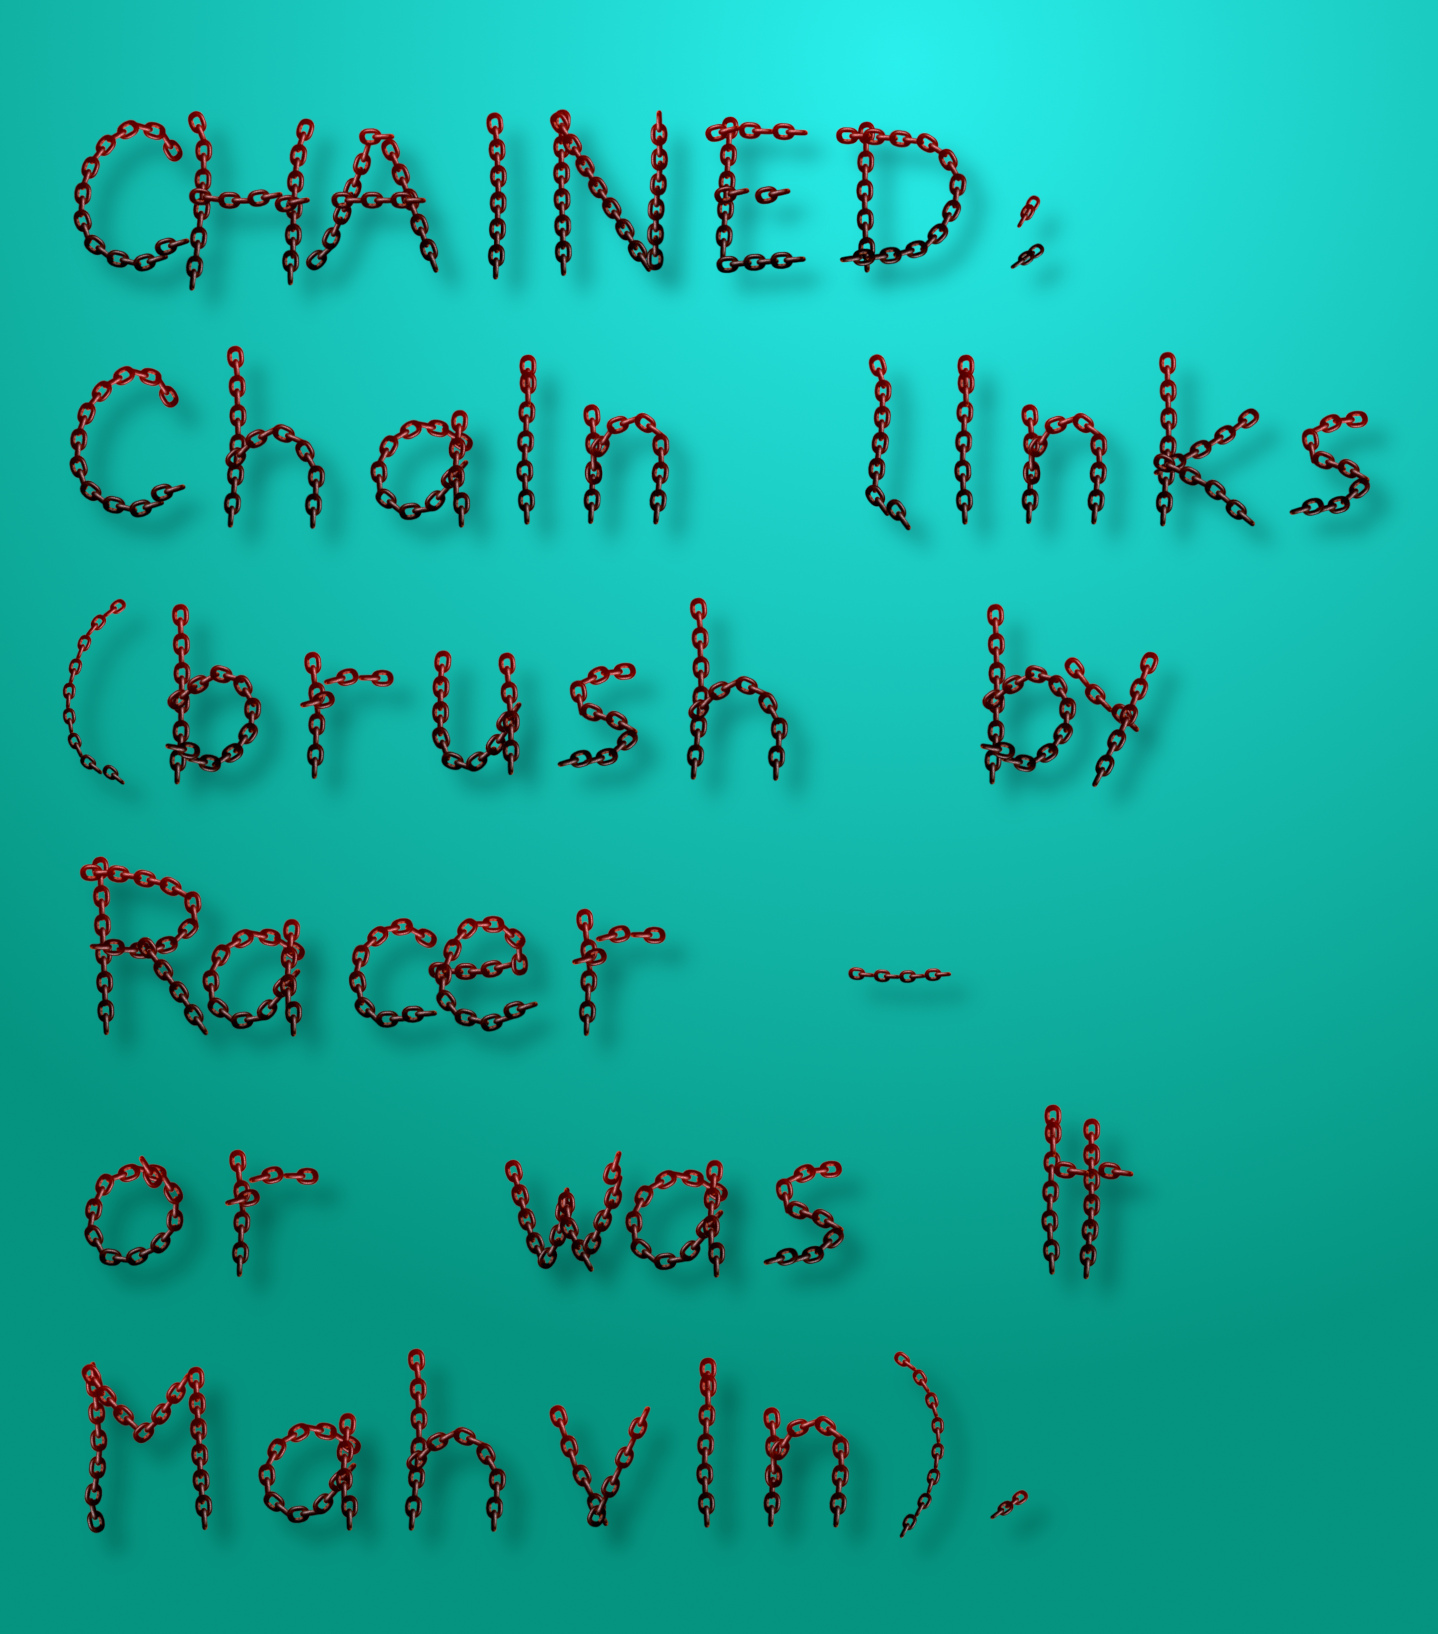 Chained.jpg